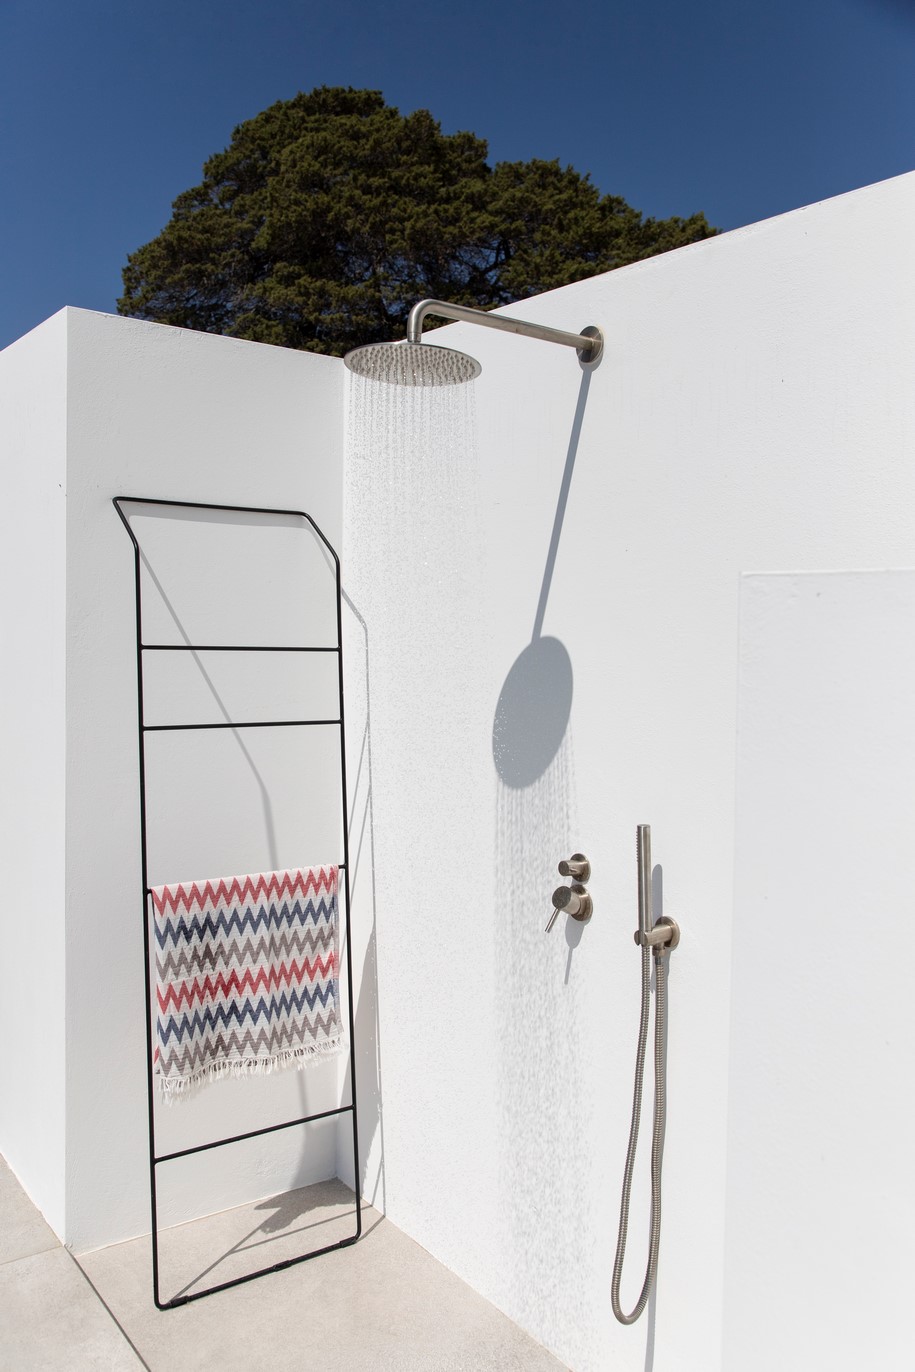 Archisearch SCAPEARCHITECTURE created the Secret Garden House in Paros